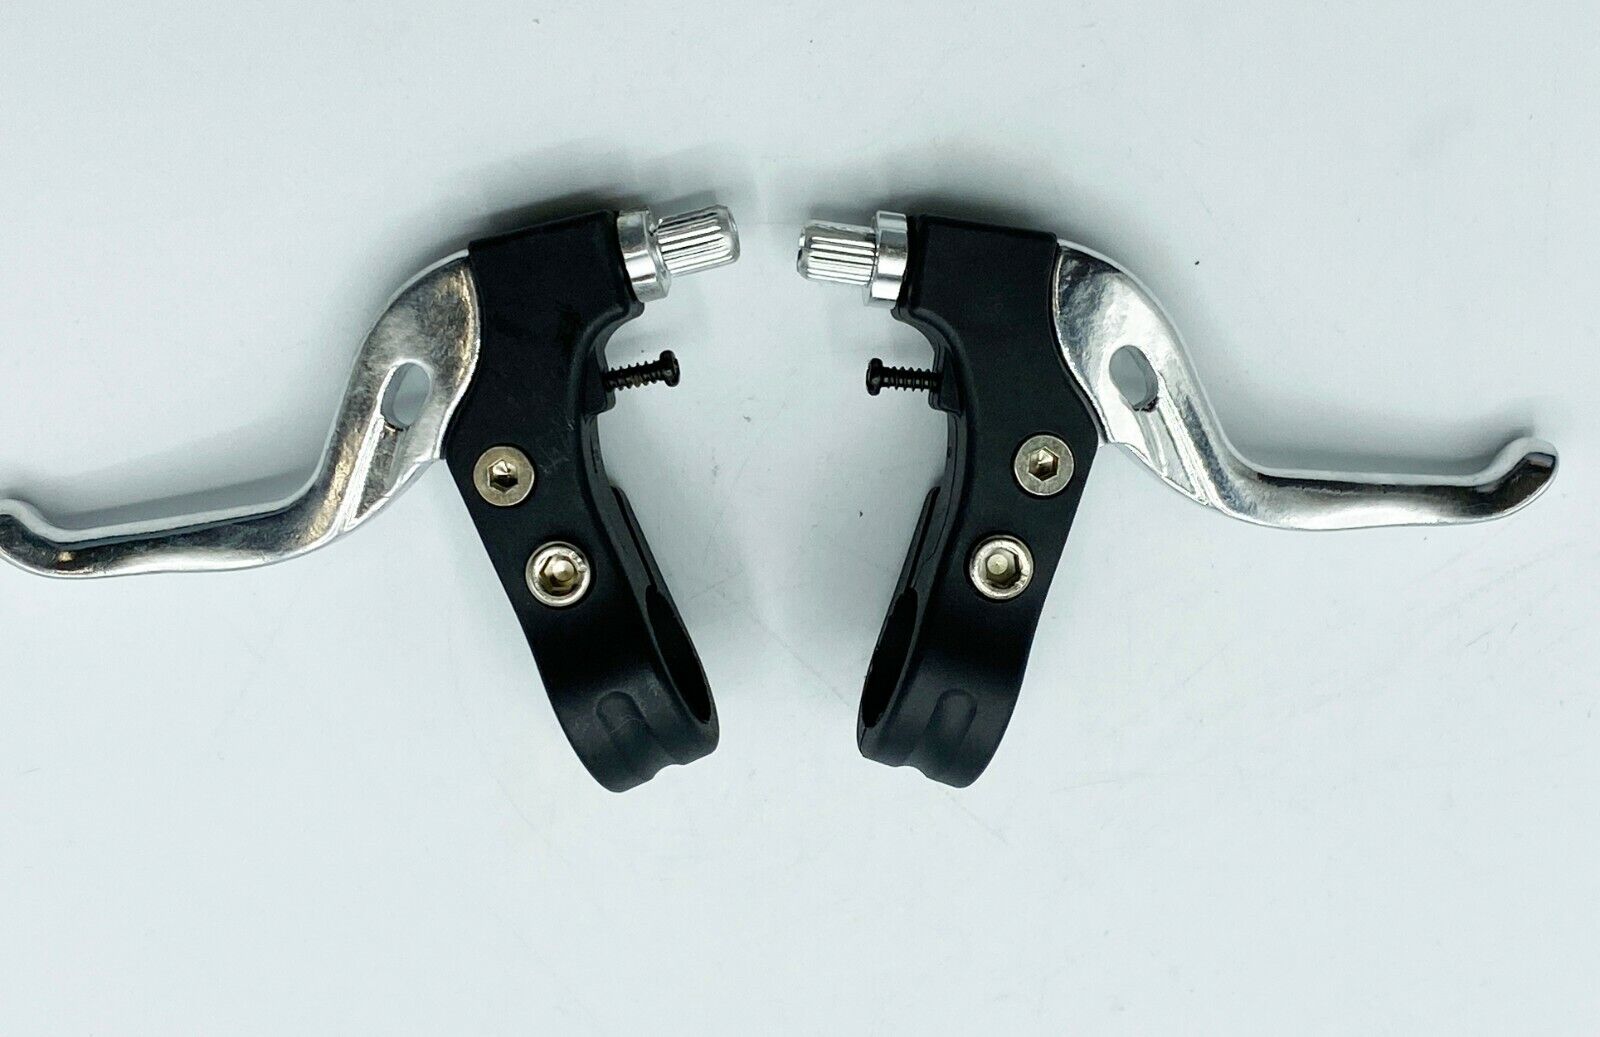 New Silver Power V-Brake Lever Pair 22.2mm for MTB Comfort BC Bicycle Bike